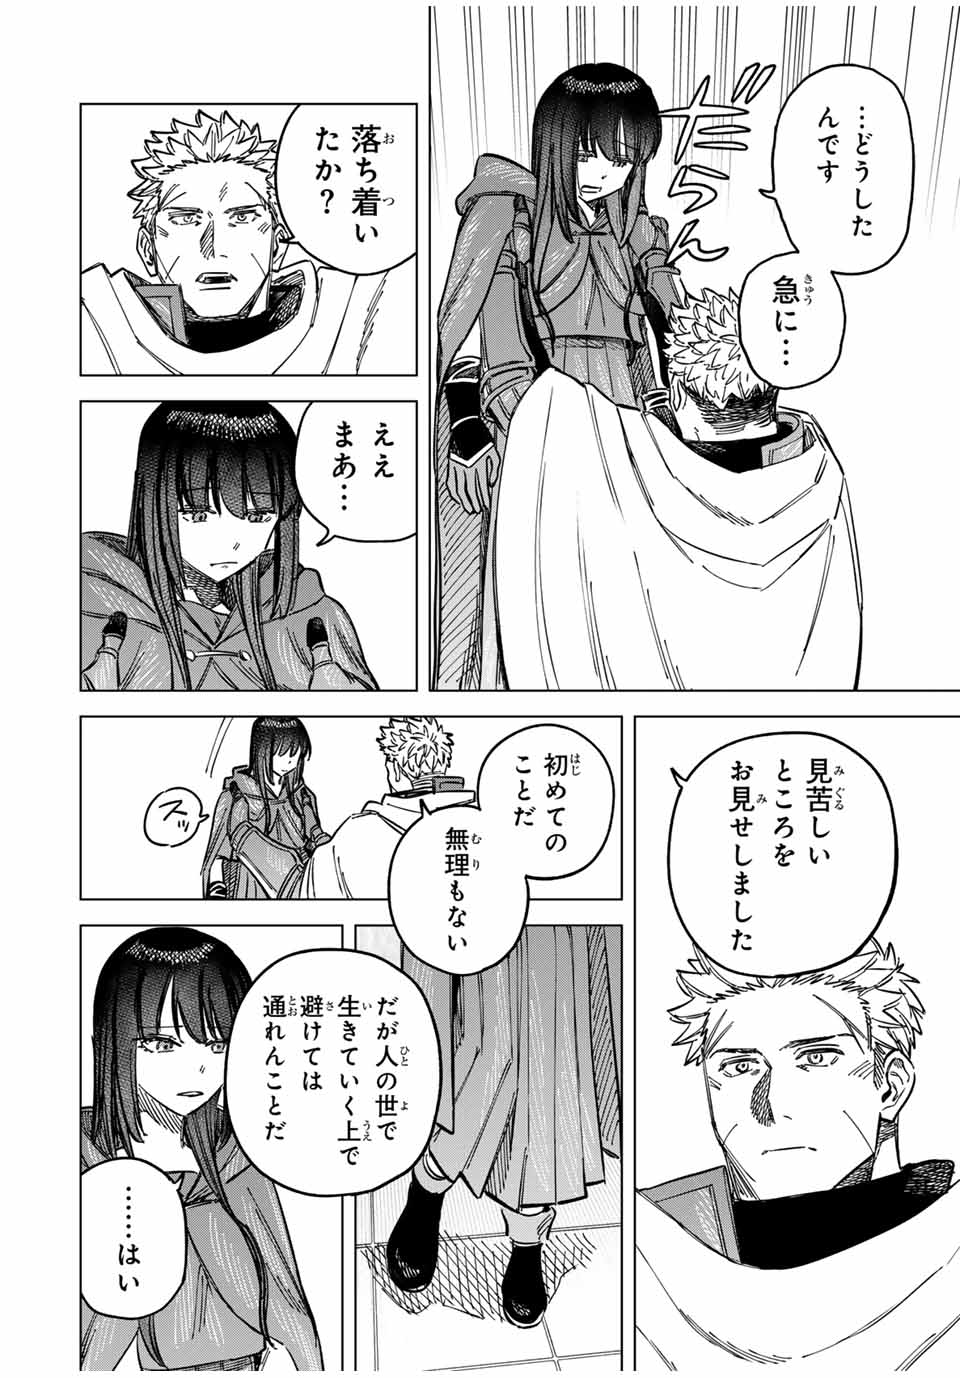 Witch and Mercenary 魔女と傭兵 第5.1話 - Page 4